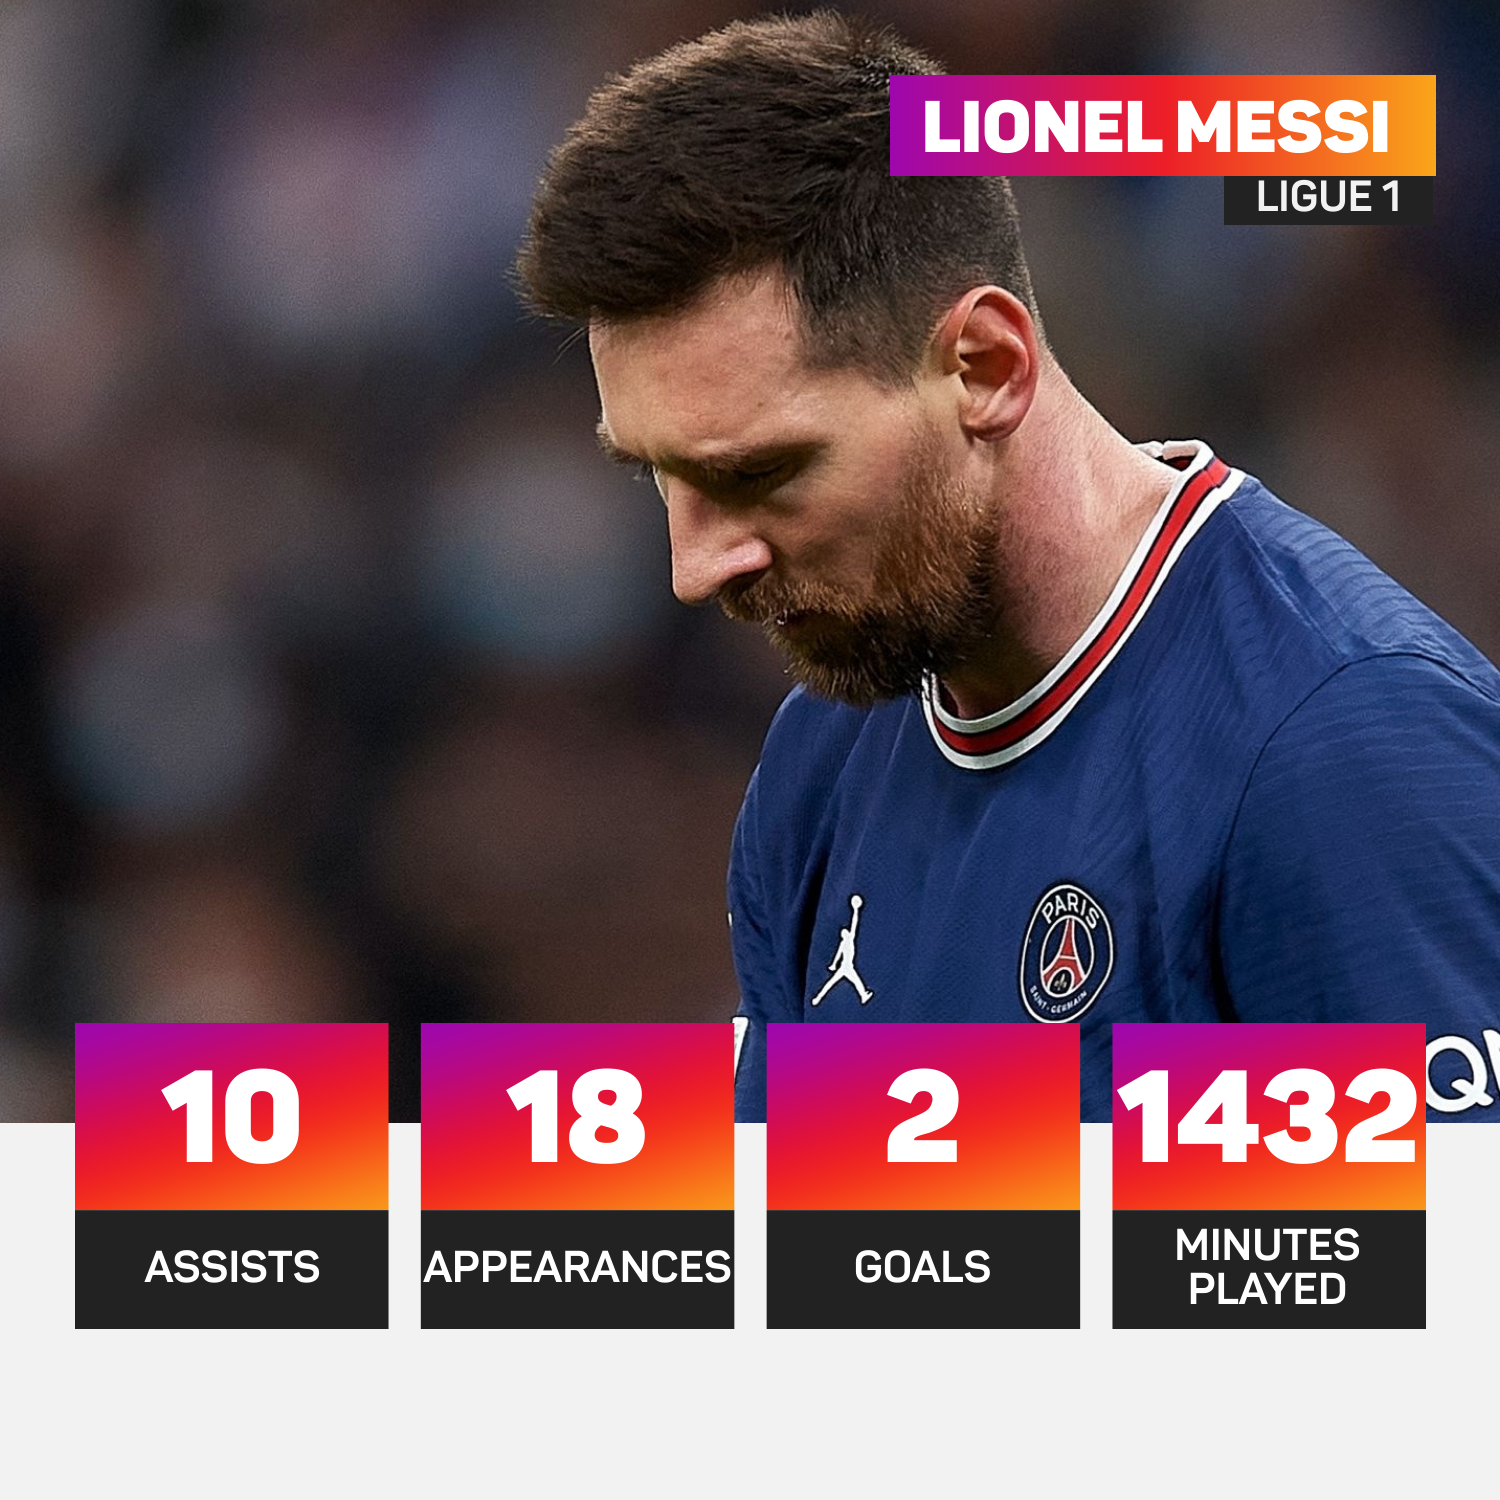 Lionel Messi has two Ligue 1 goals to his name